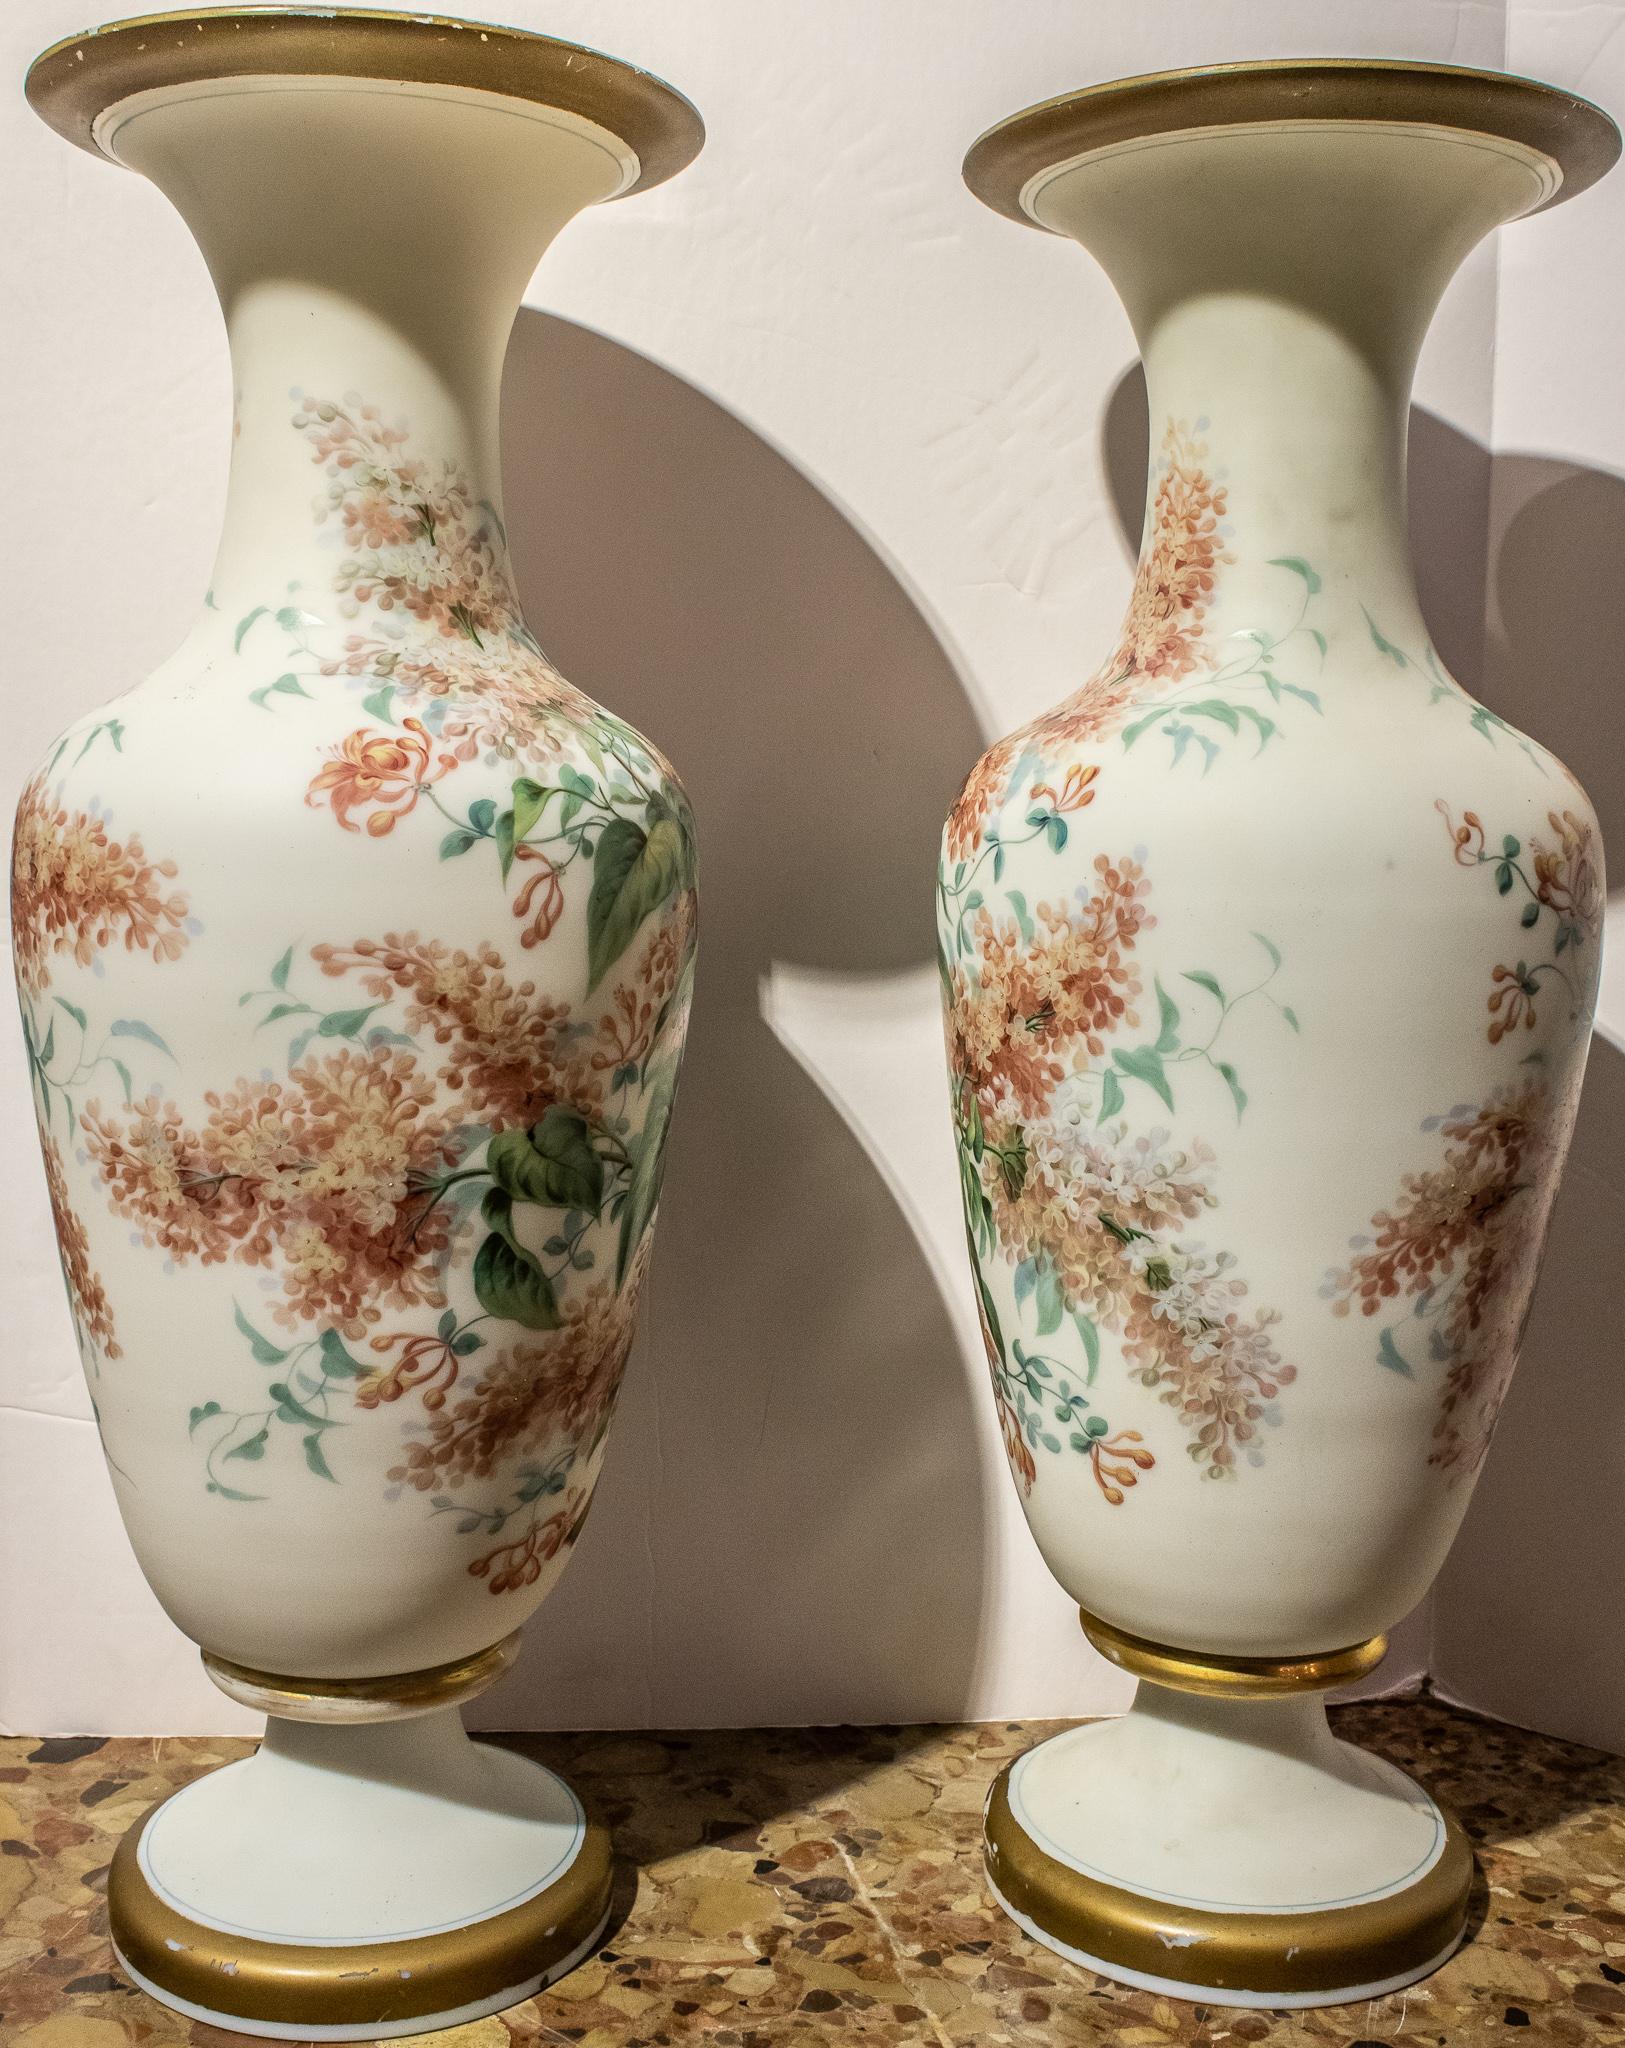 Large Pair of Tall Opaline Vases with Painted Bird and Floral Decorations In Excellent Condition For Sale In New York, NY